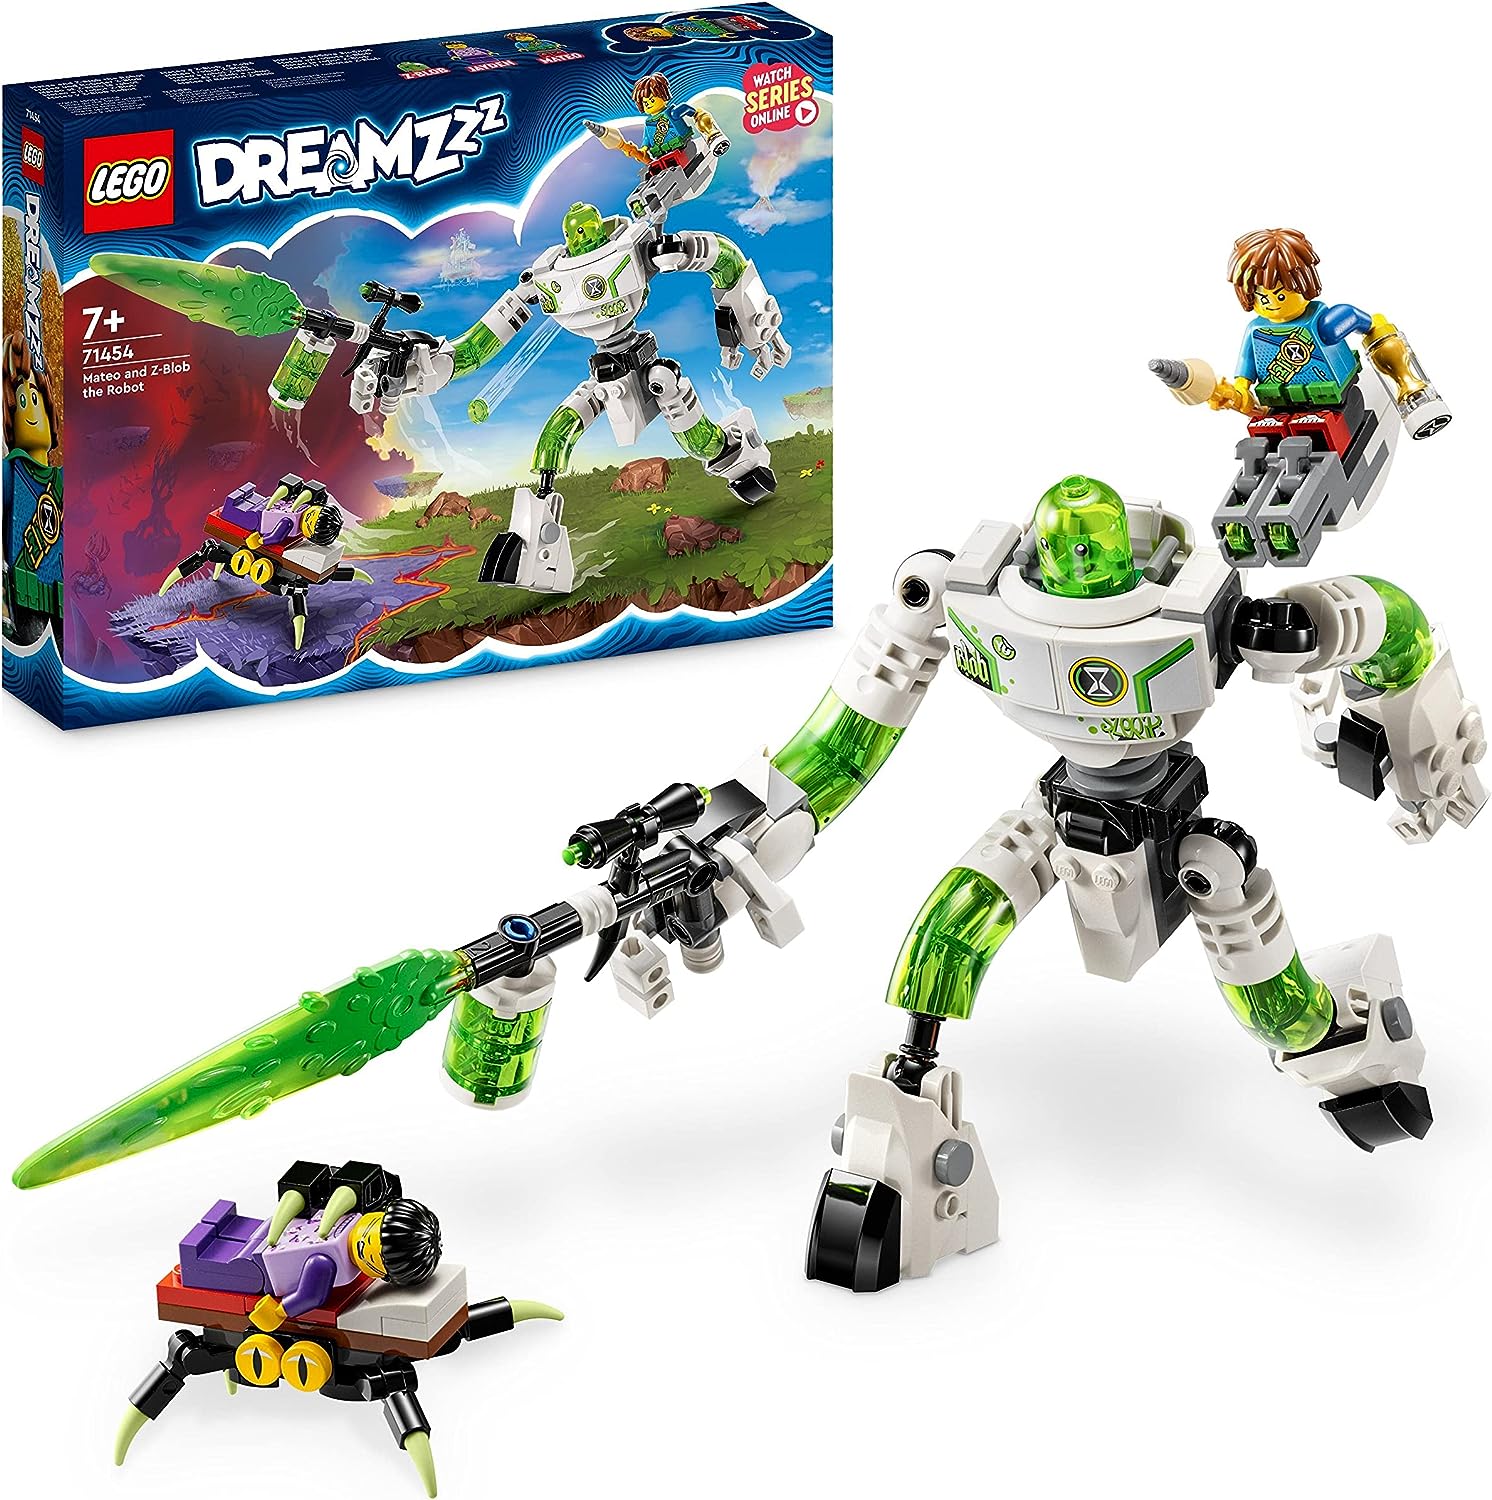 LEGO 71454 DREAMZzz Mateo and Robot Z-Blob, Creative Adventure Toy Set with Large Robot Figure, 2 Mini Figures, Based on the TV Show, Toy for Children from 7 Years